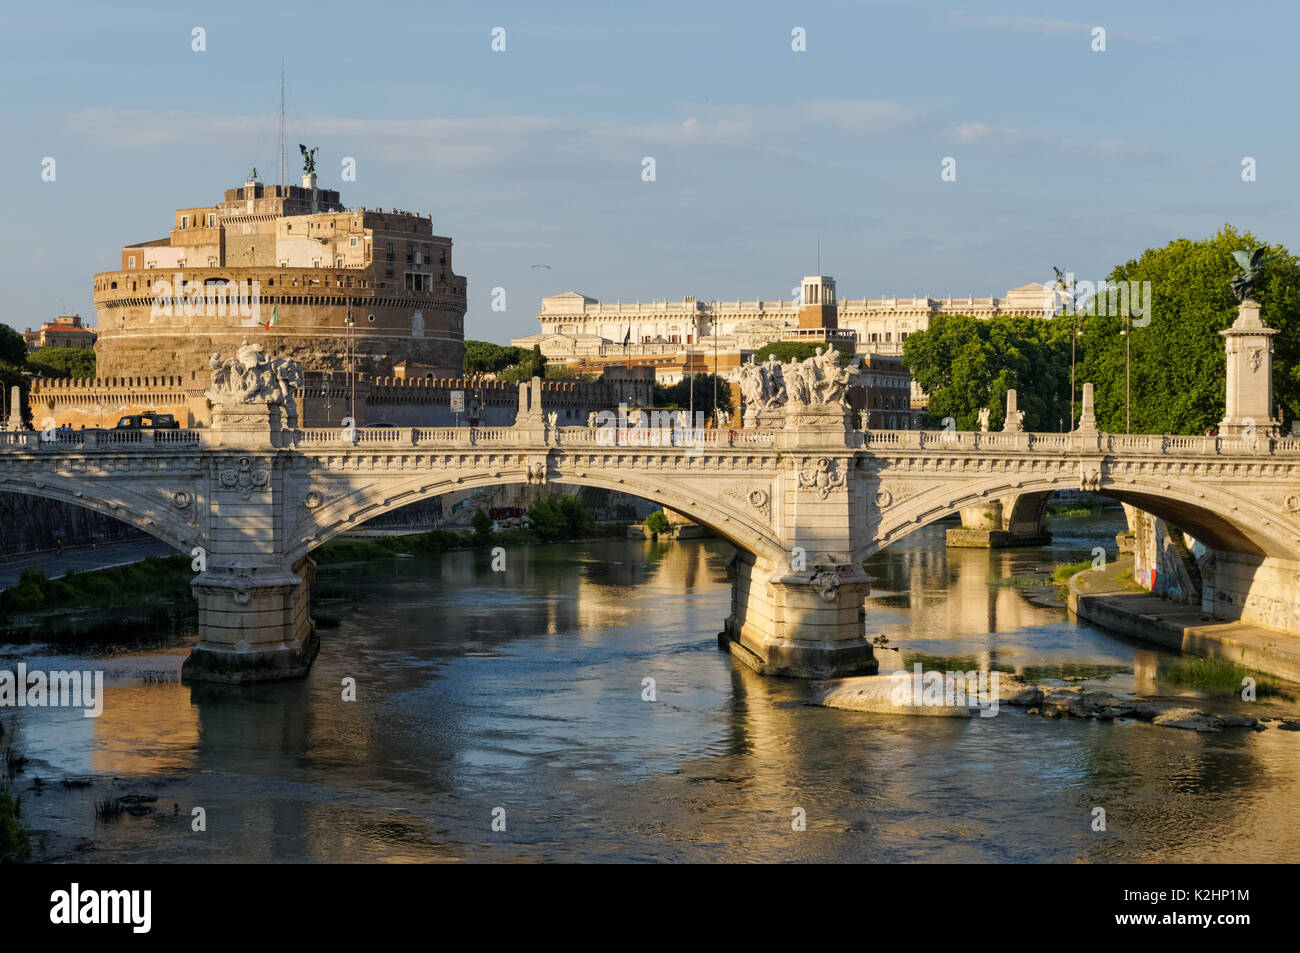 The Castel Sant'Angelo and the Sant'Angelo Bridge over the River Tiber in Rome, Italy Stock Photo